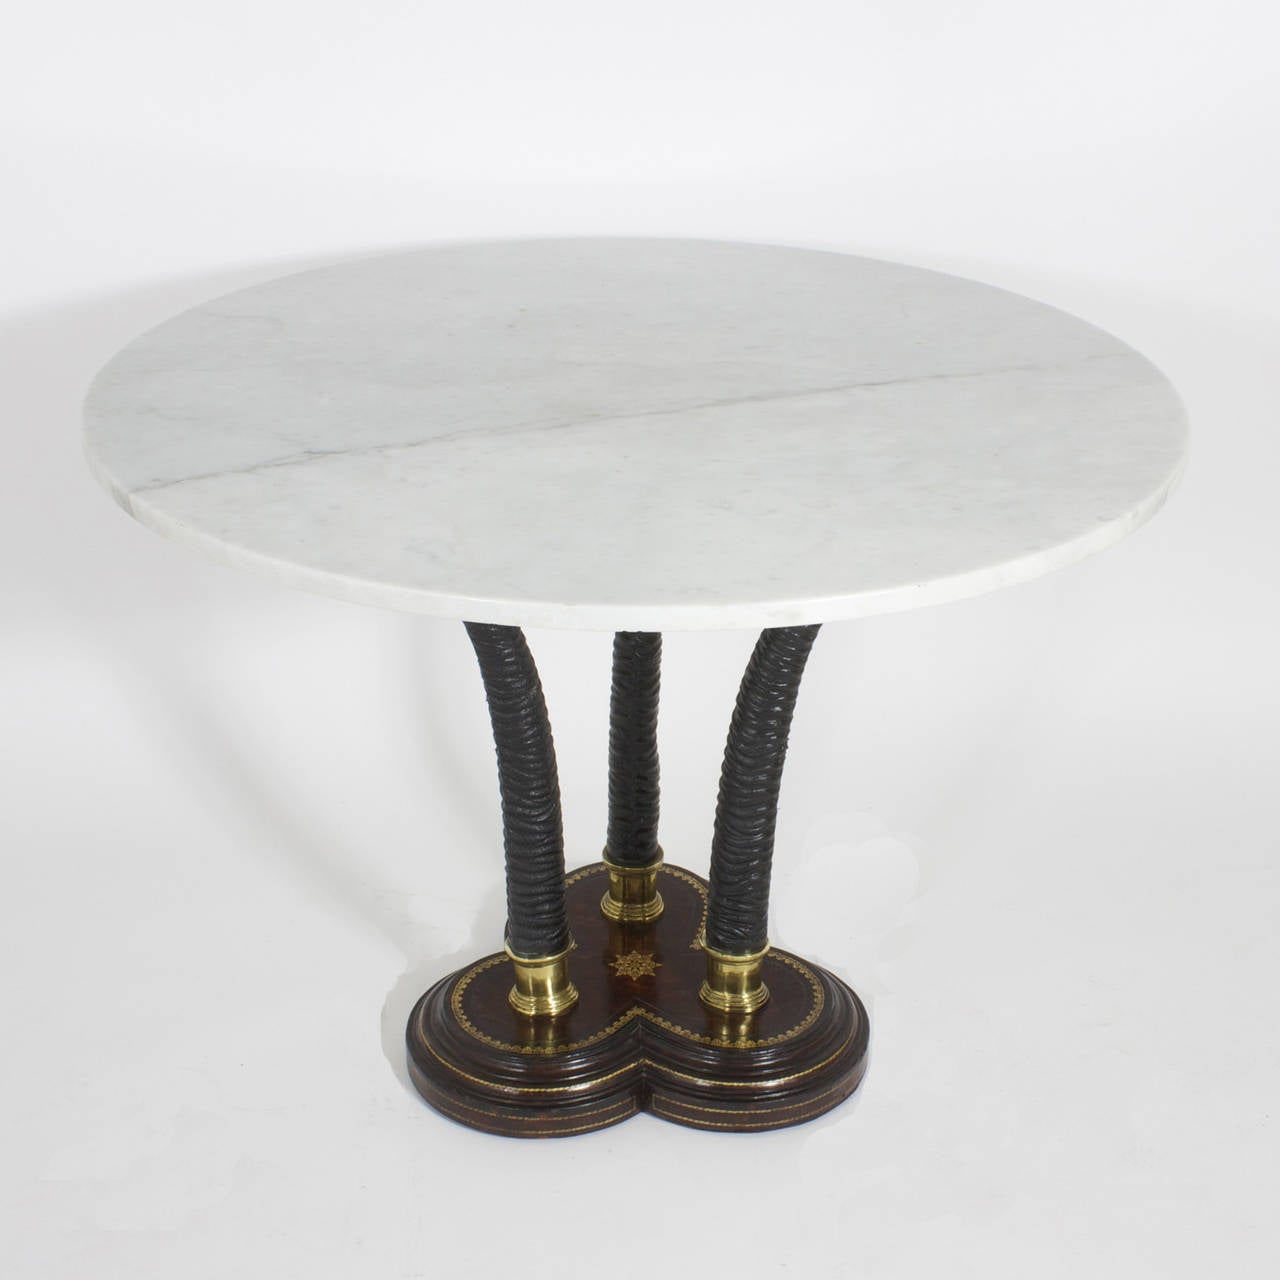 A very intriguing and handsome centre table signed Maitland-Smith. Featuring a white with marble top of strong grey veins that rests over three faux antelope horn legs with polished brass cuffs. The base is a clover shape with triple plinth